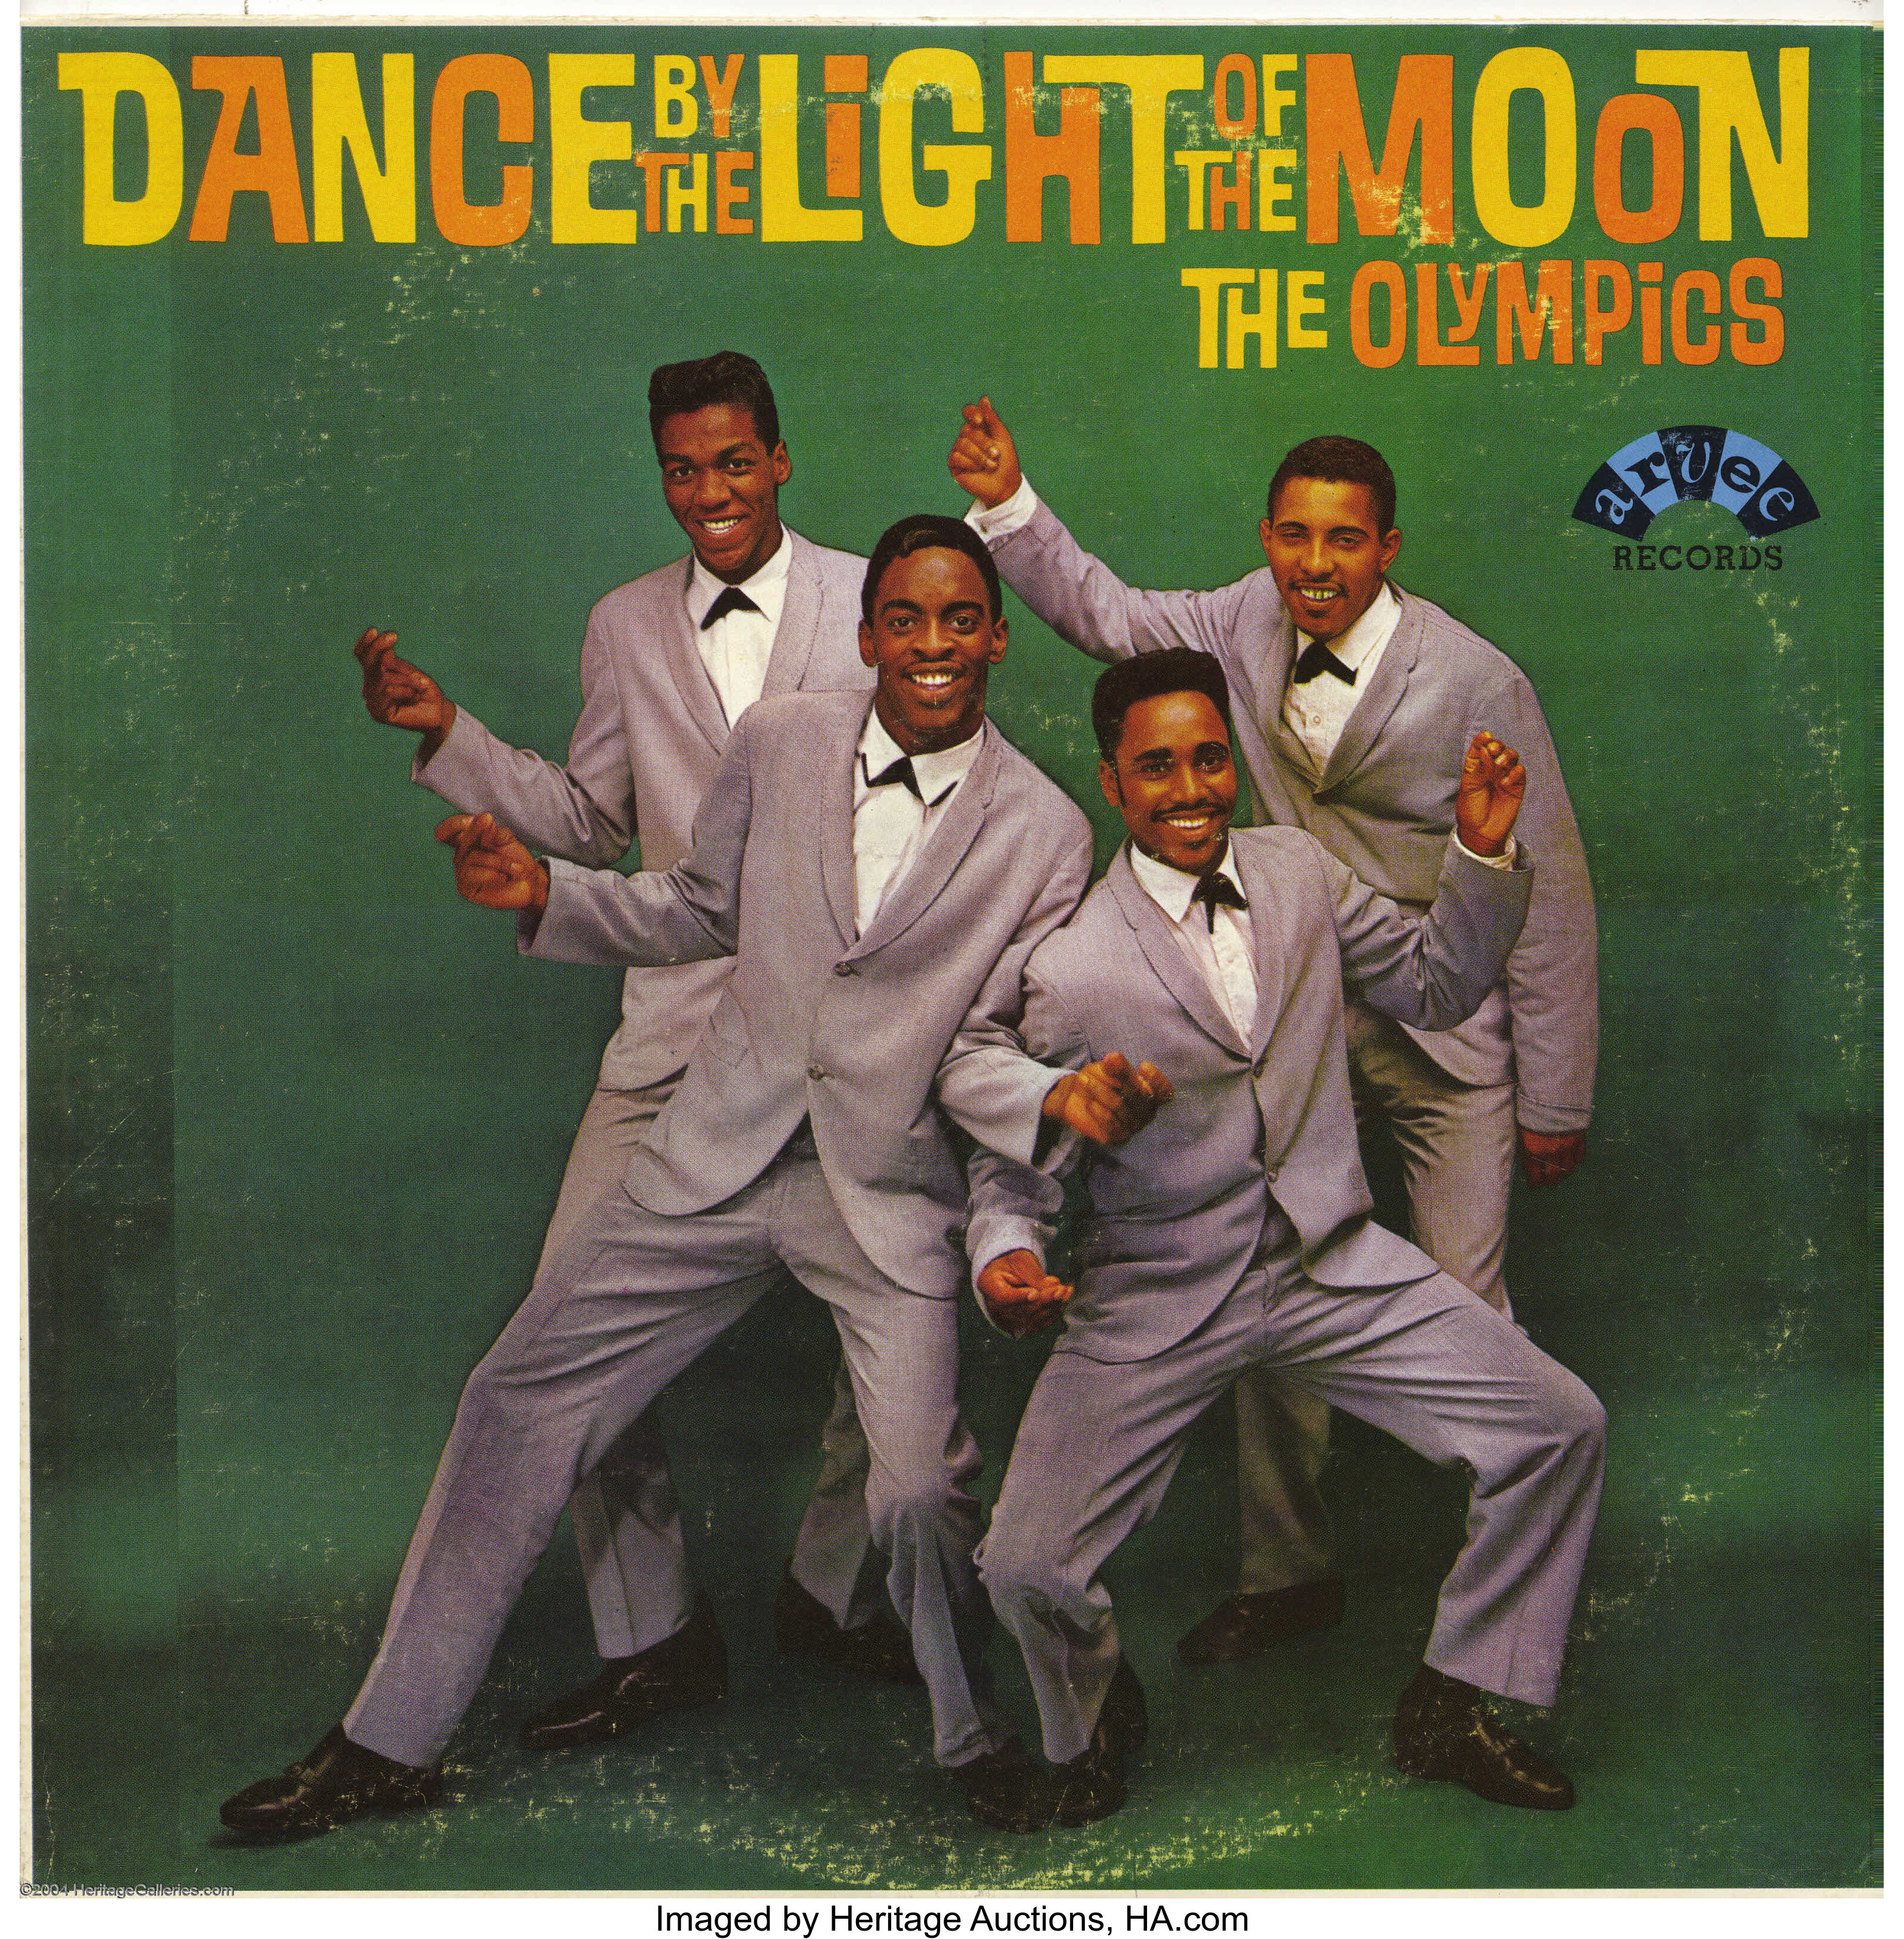 Image result for the olympics band dance by the light of the moon